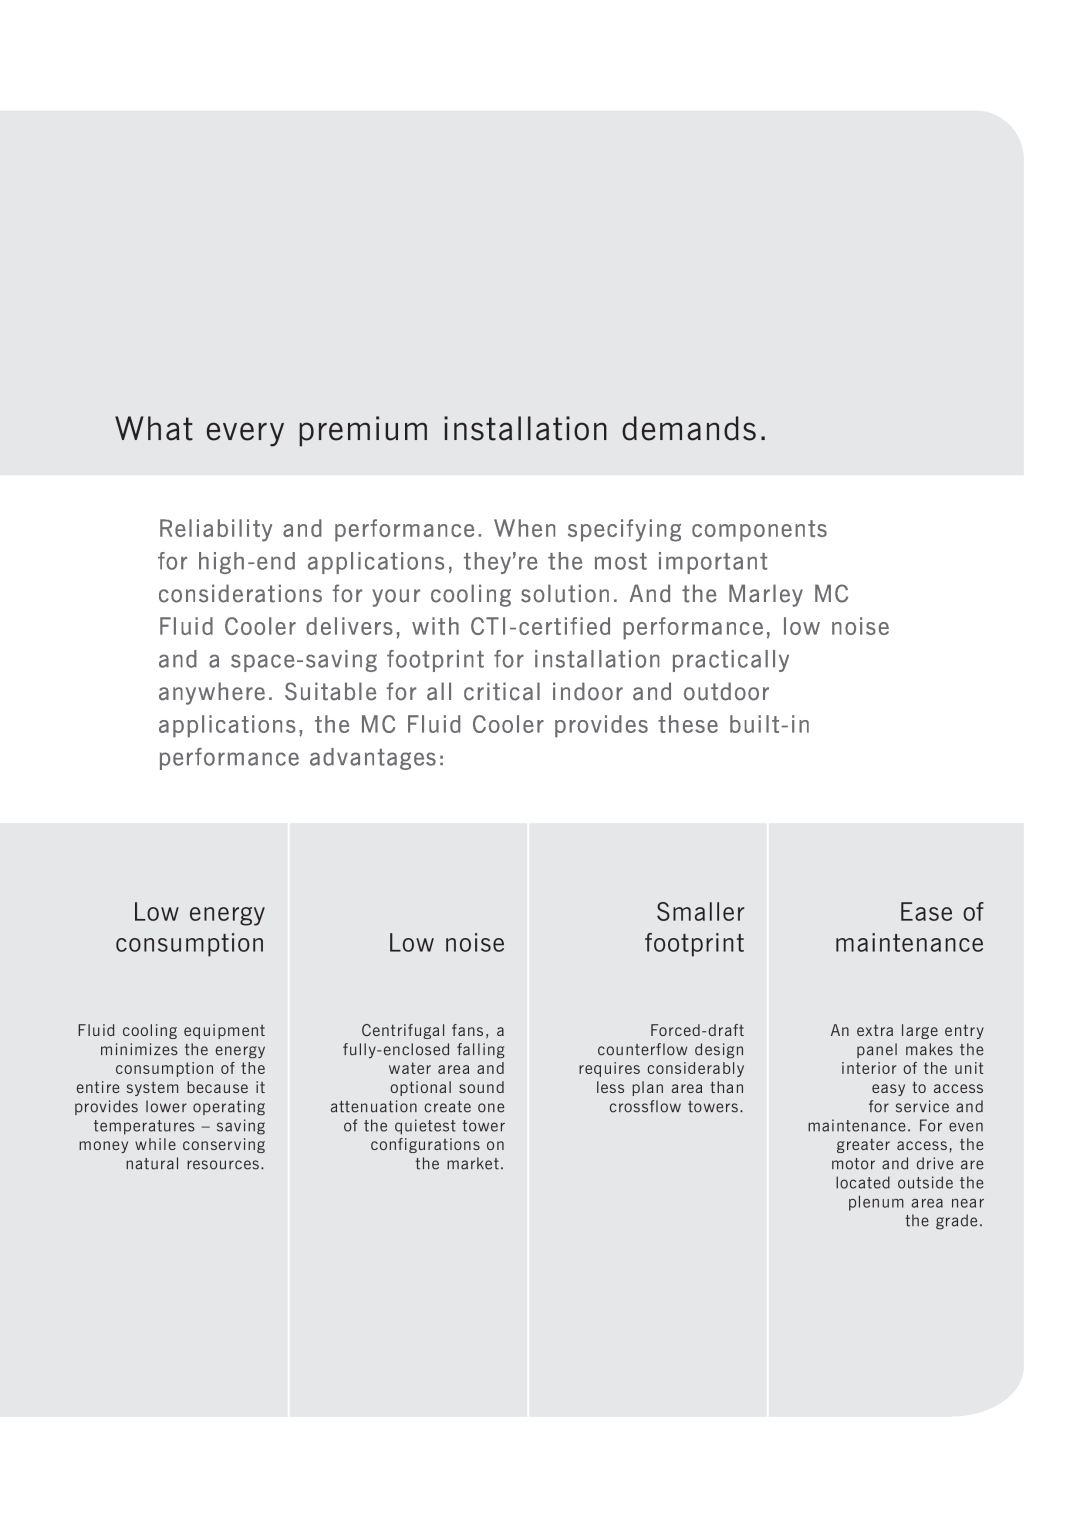 SPX Cooling Technologies Marley MC manual What every premium installation demands, Low energy consumption, Low noise 